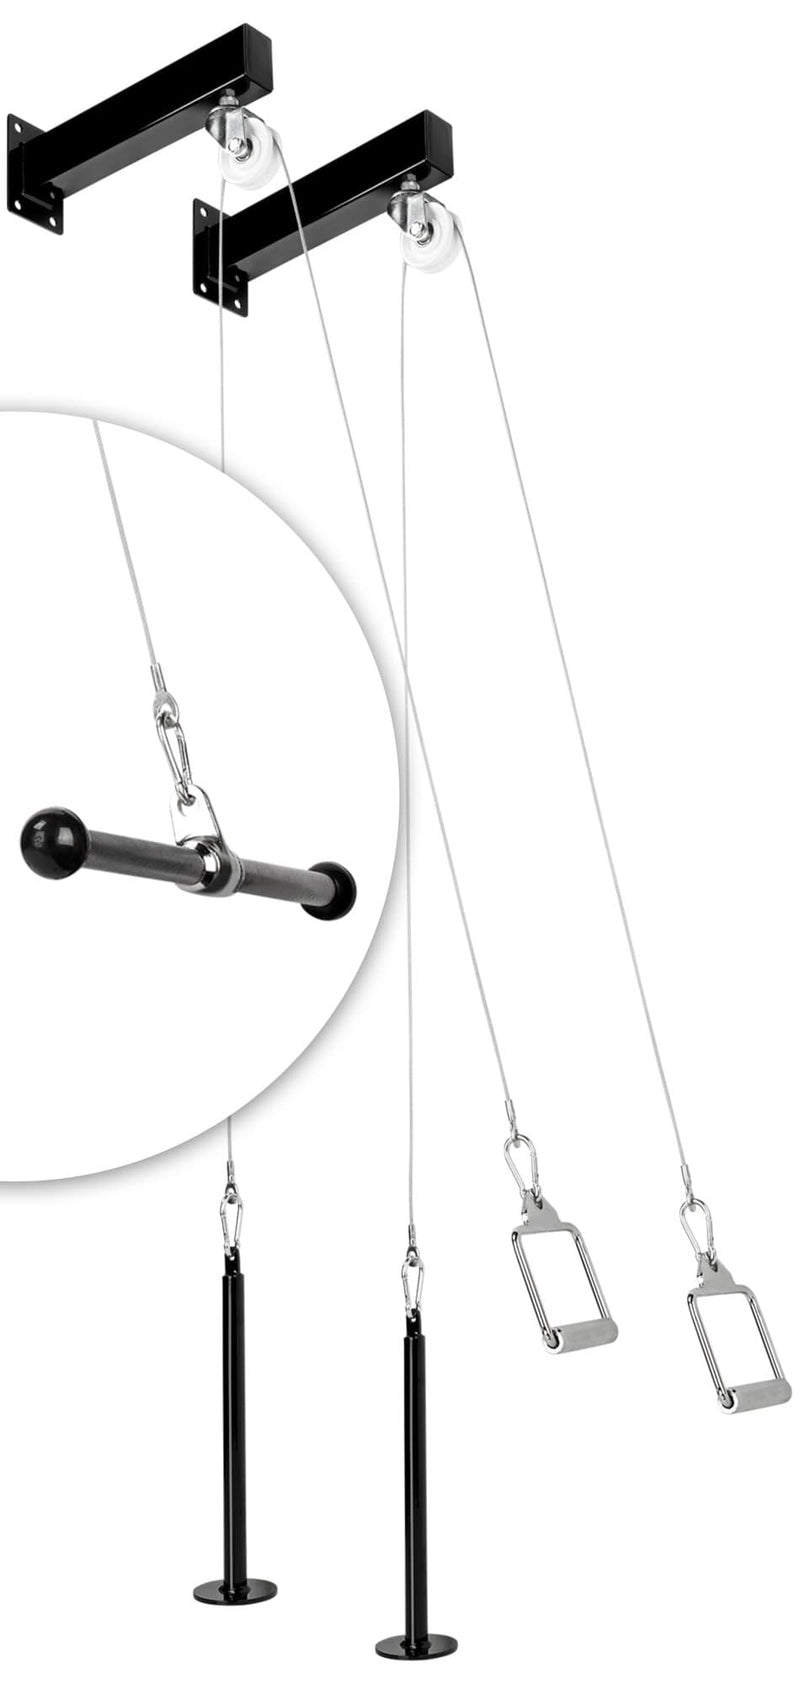 Cable pull system + handle set lat pulldown